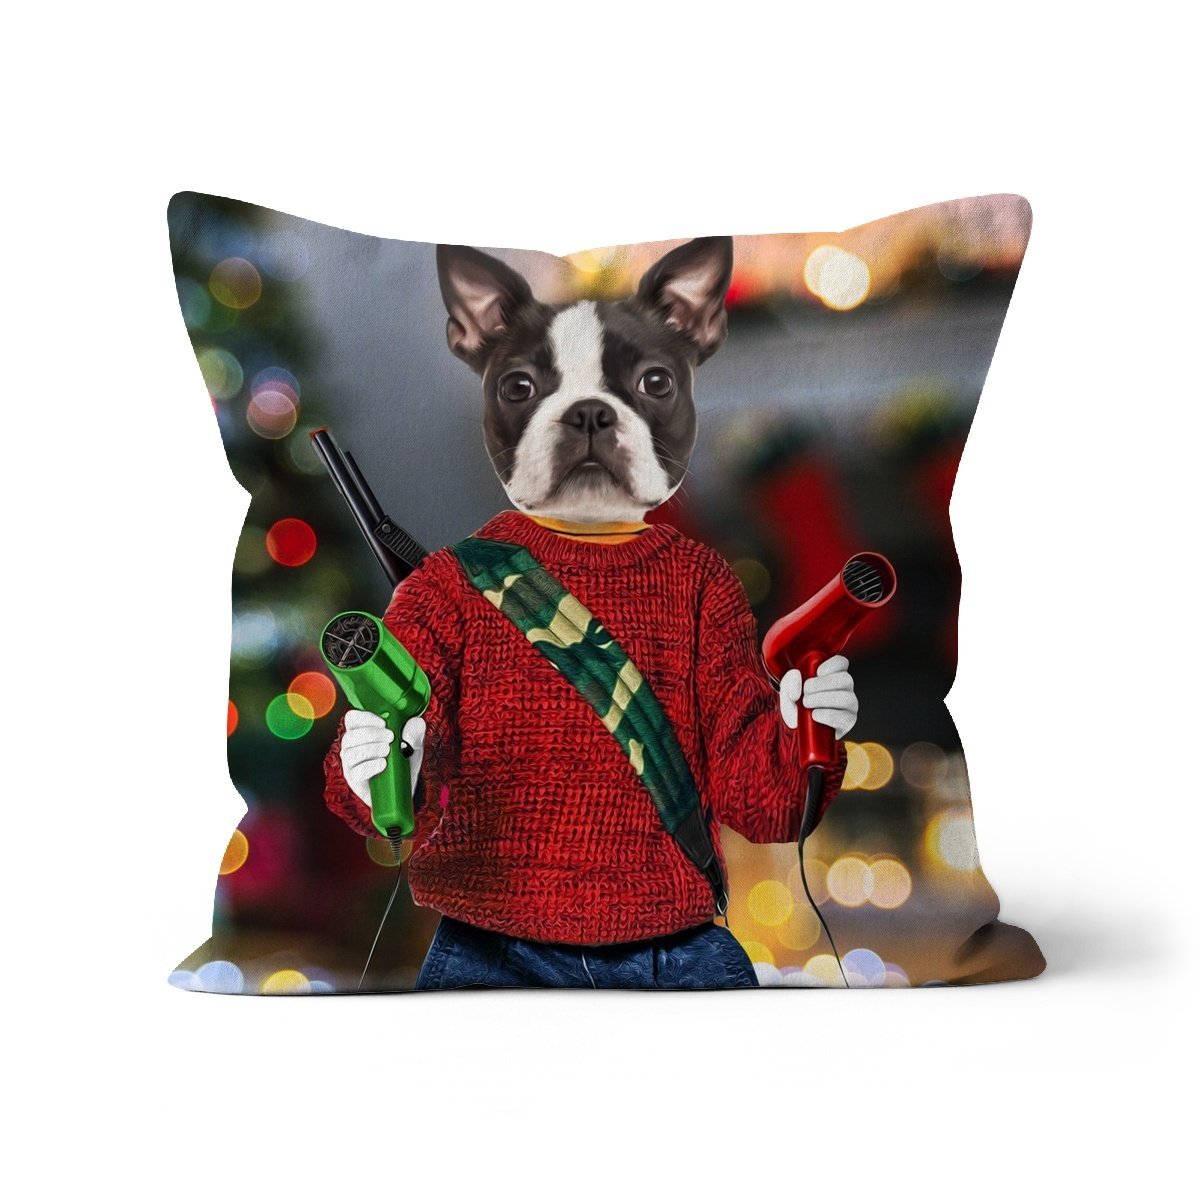 Kevinnn (Home Alone 1 Inspired): Custom Pet Cushion - Paw & Glory - #pet portraits# - #dog portraits# - #pet portraits uk#paw & glory, pet portraits pillow,pet print pillow, photo pet pillow, pet custom pillow, custom cat pillows, dog pillows personalized